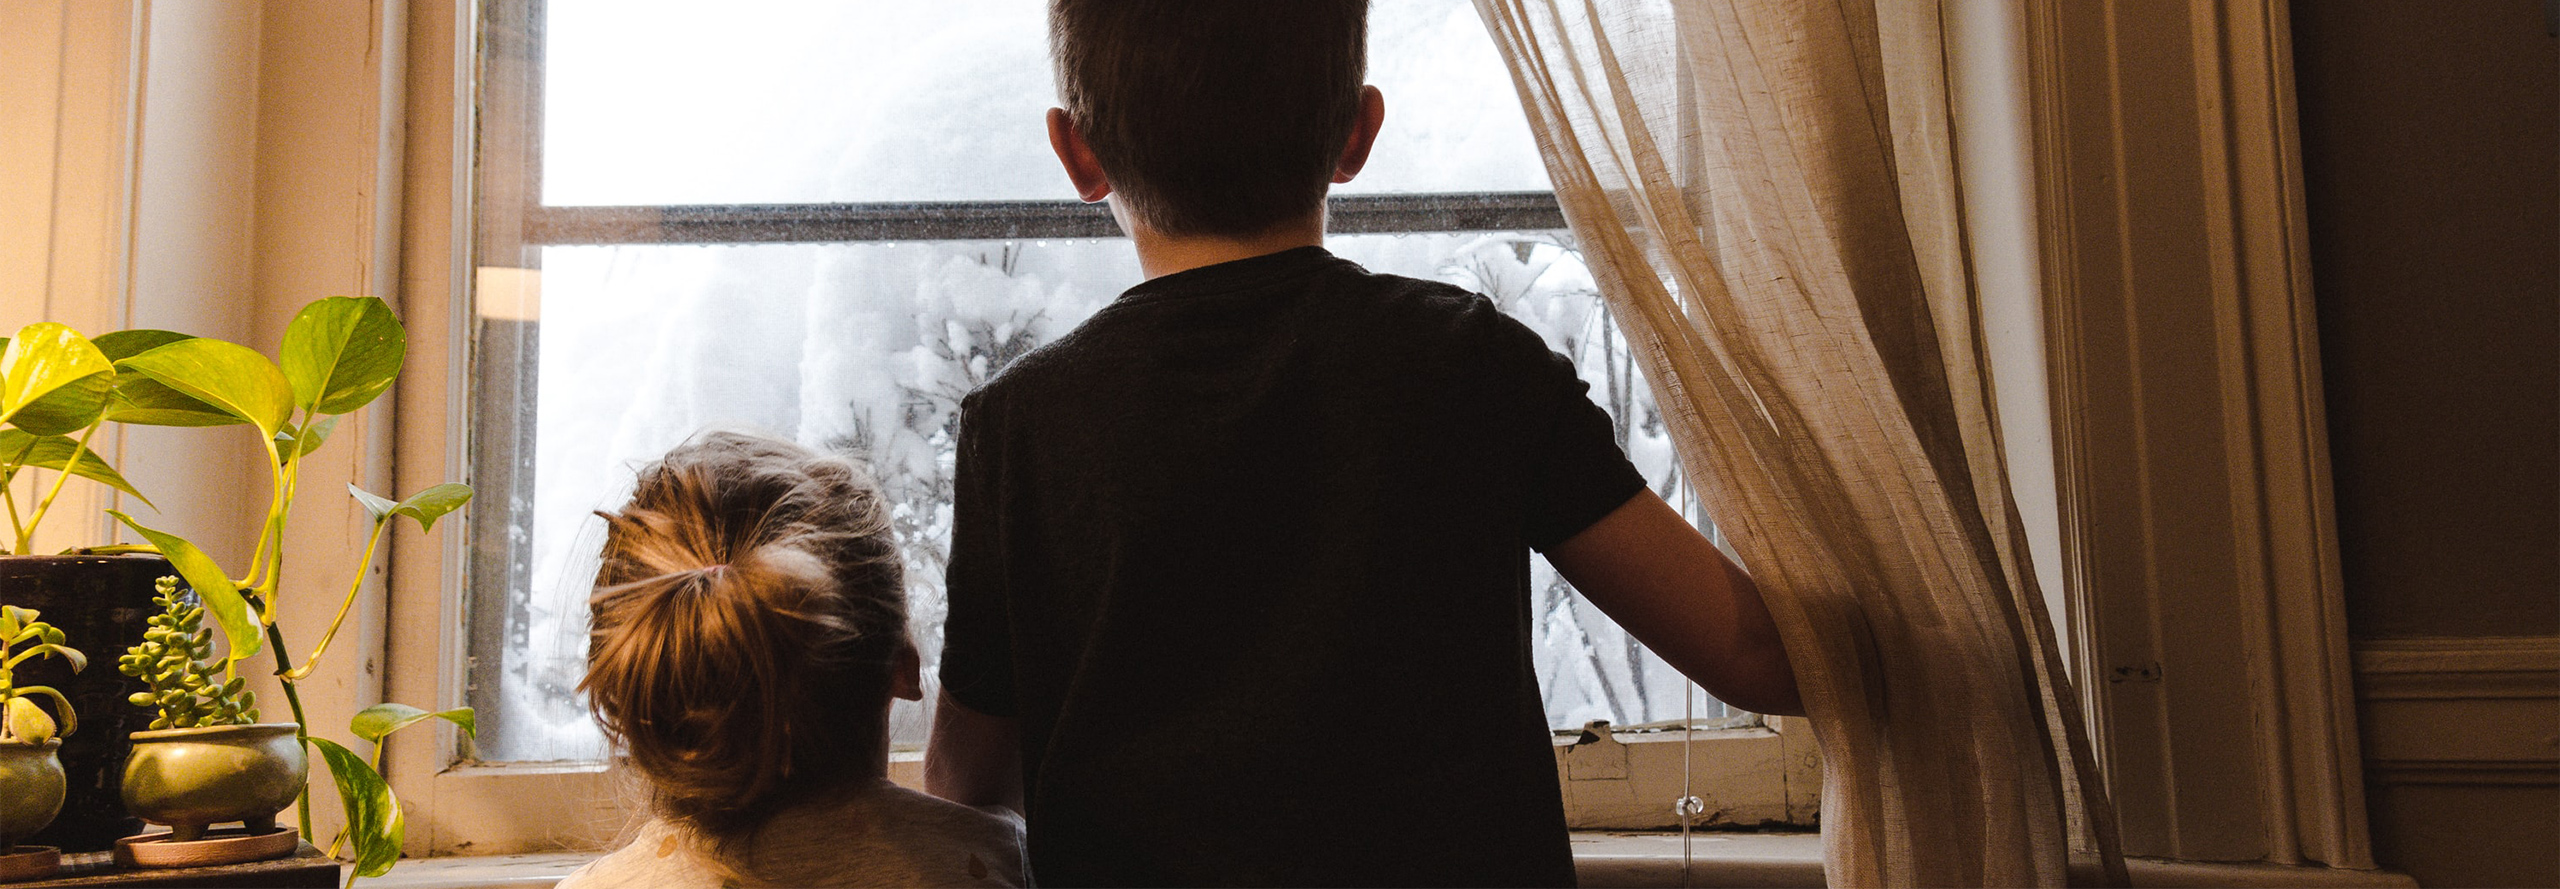 Two small children look out of their window at the snow falling.